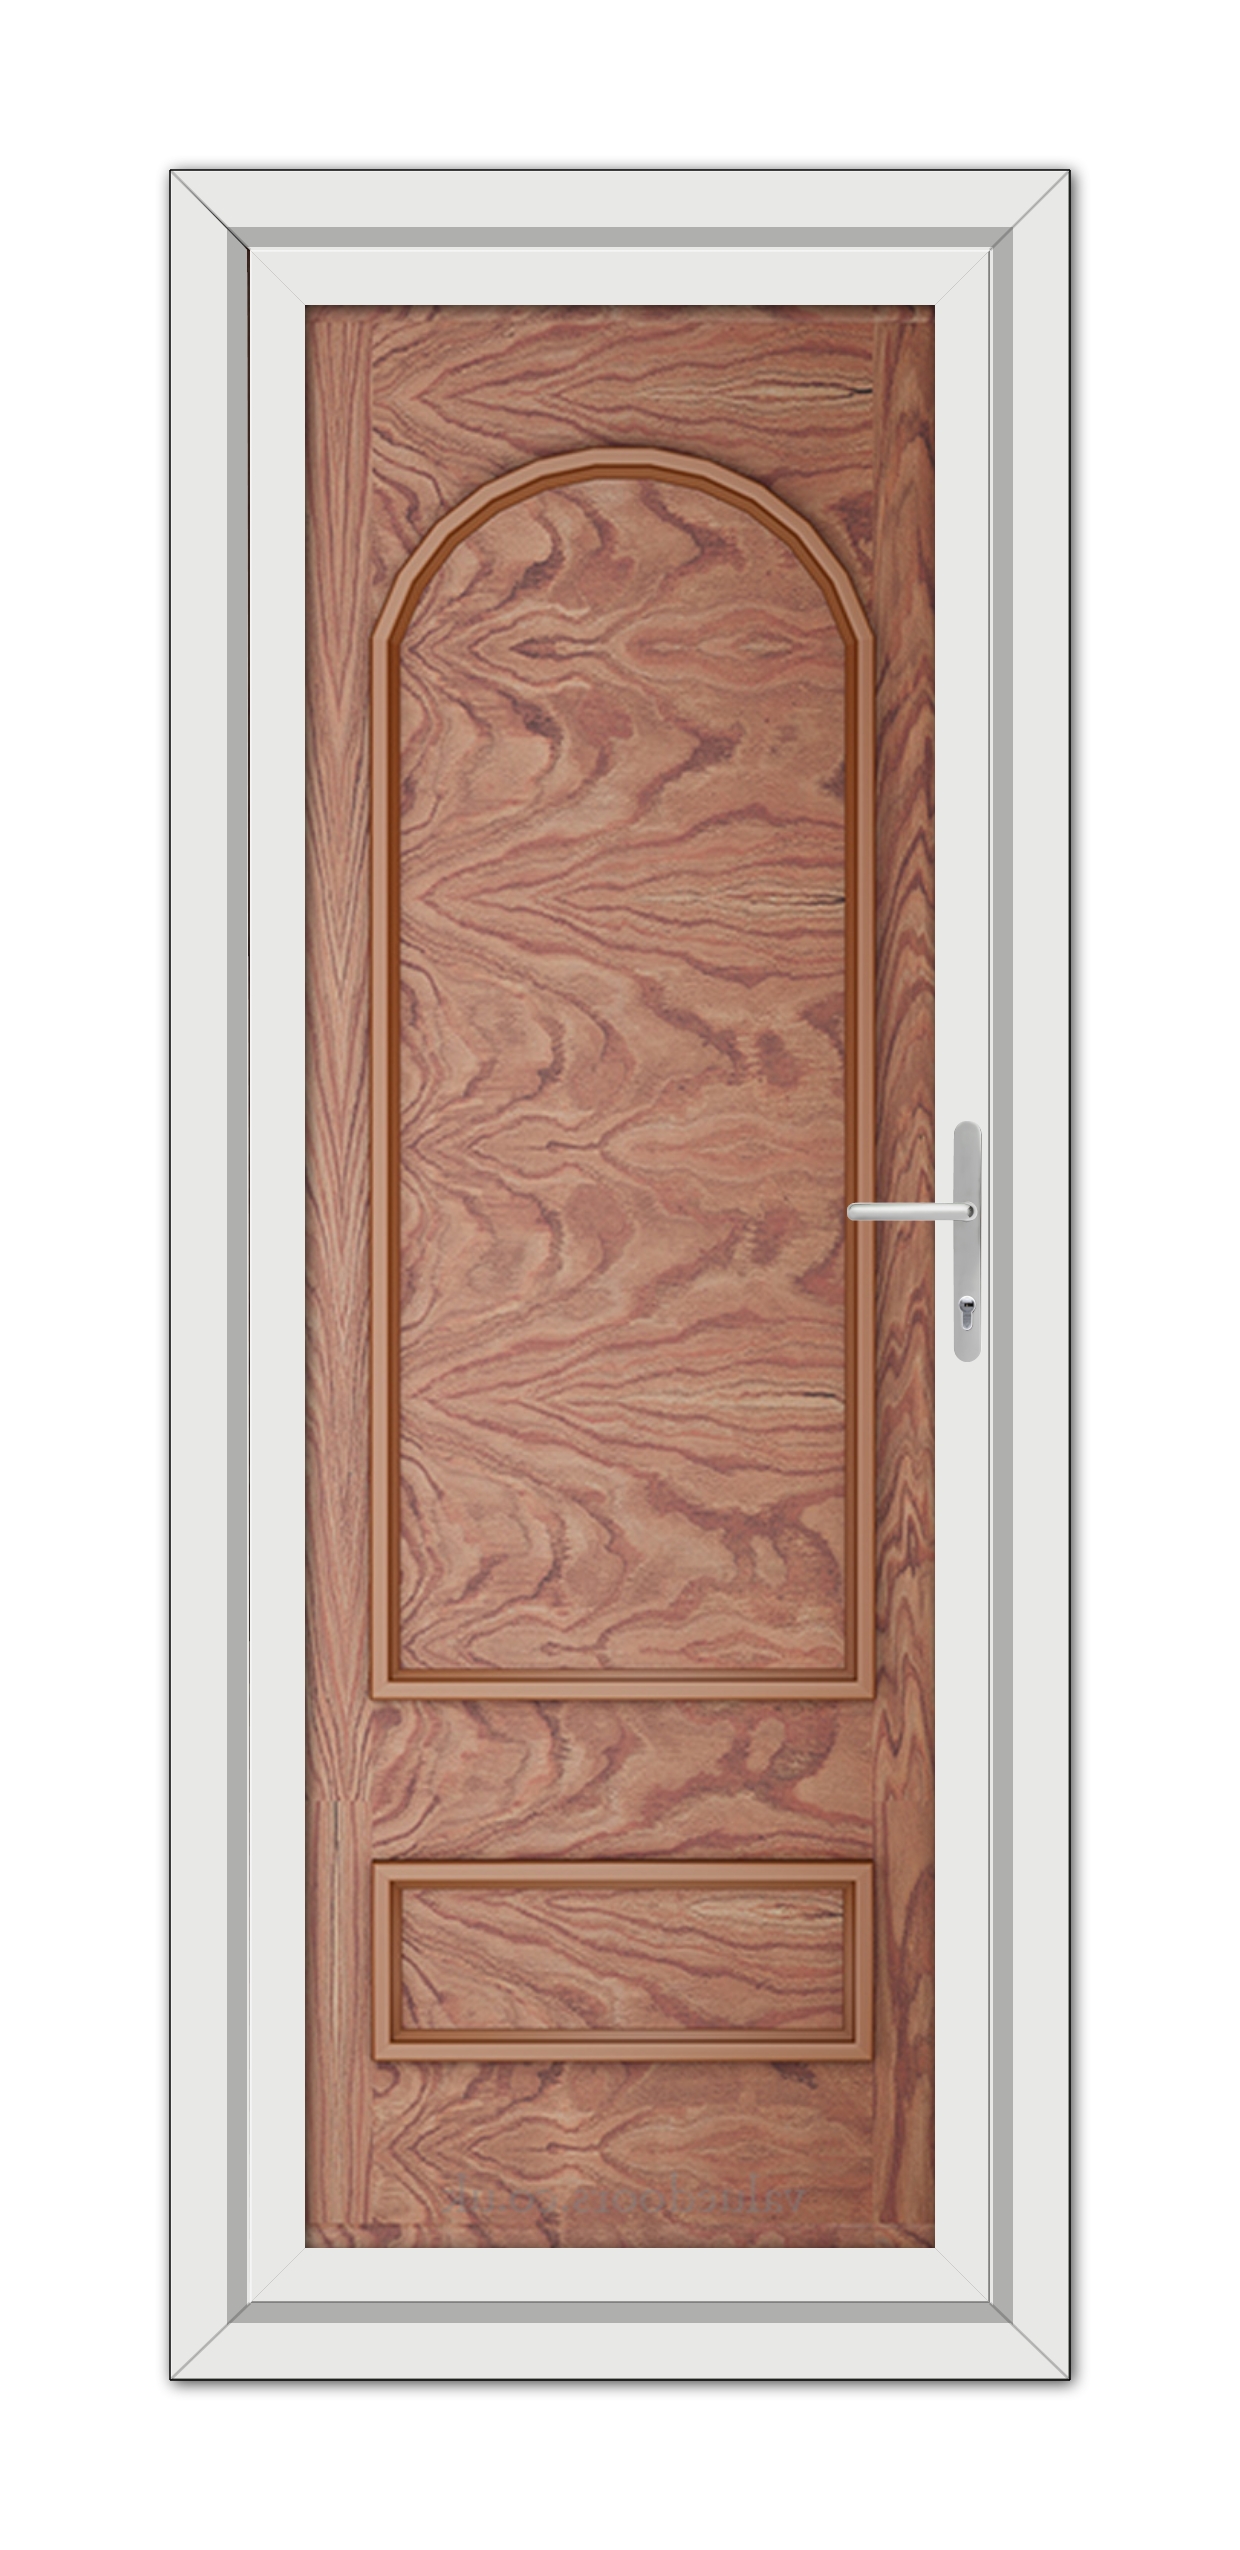 A Solid Oak Canterbury Solid uPVC Door with panels, fitted within a white frame, featuring a metal handle on the right side.